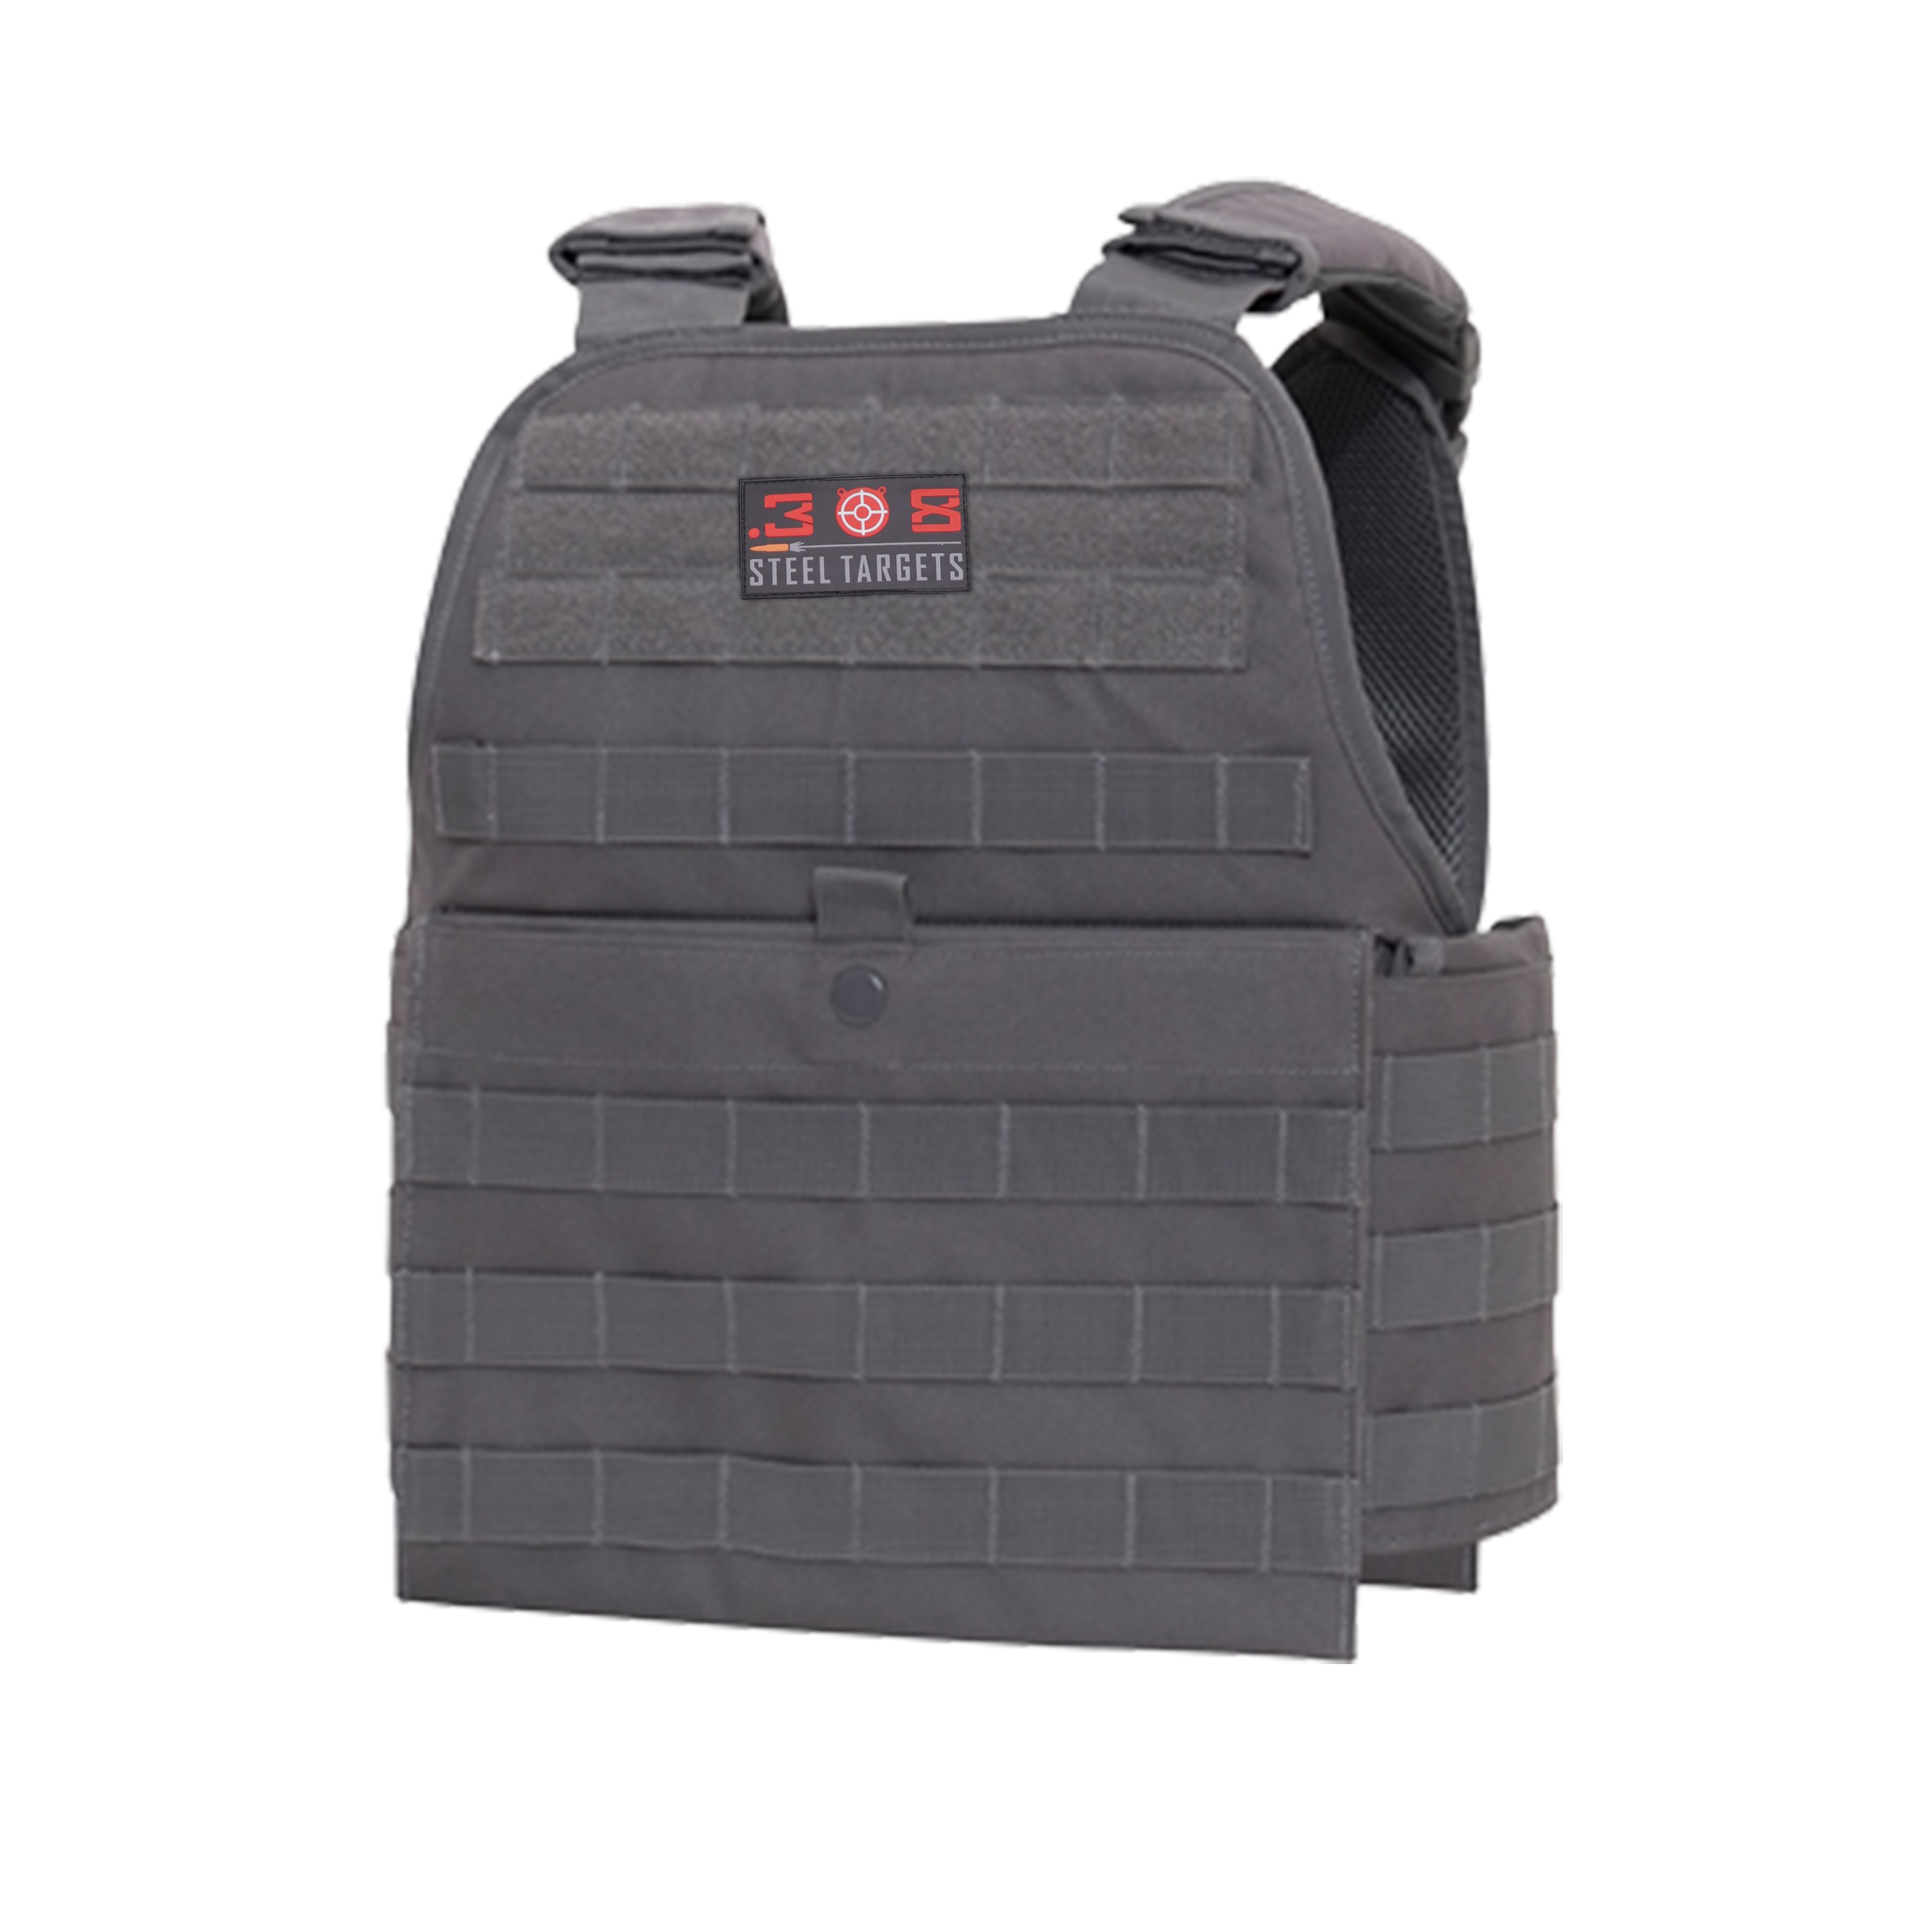 Concealable Bulletproof Vest Carrier BODY Armor Made With Kevlar 3A Xl M  2xl 3xl (#304678845644)